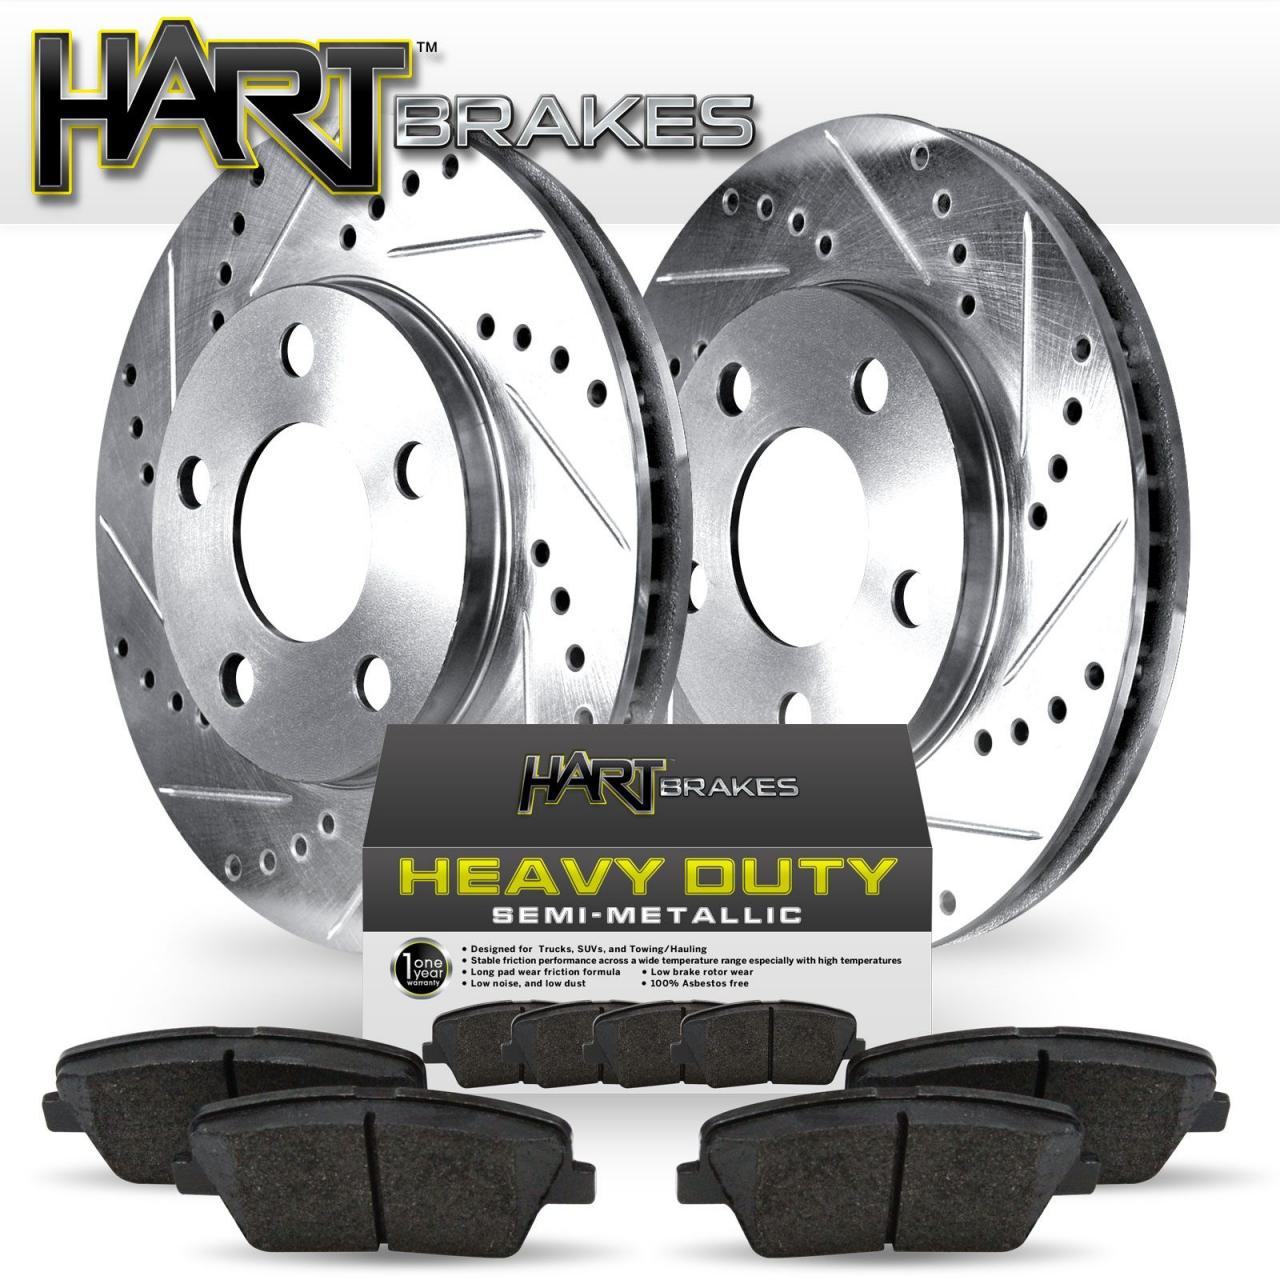 ✓ Hart Brakes Rotors Reviews 2021 | Which Is Better?